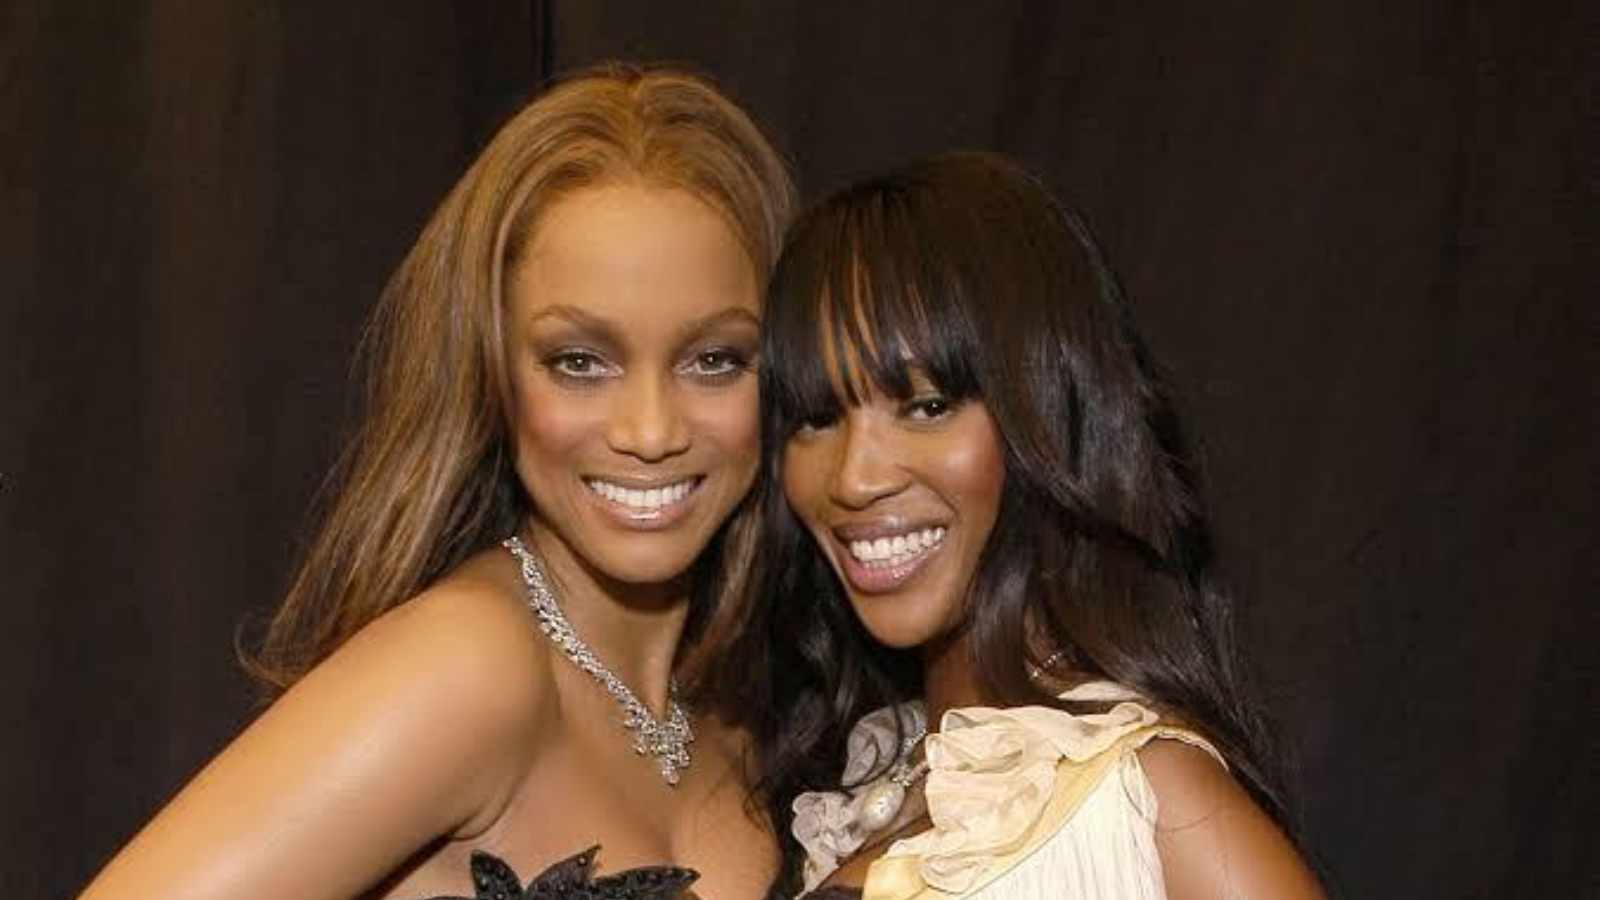 Tyra Banks felt a hostility from Naomi Campbell that she didn't want her to be in the modelling business